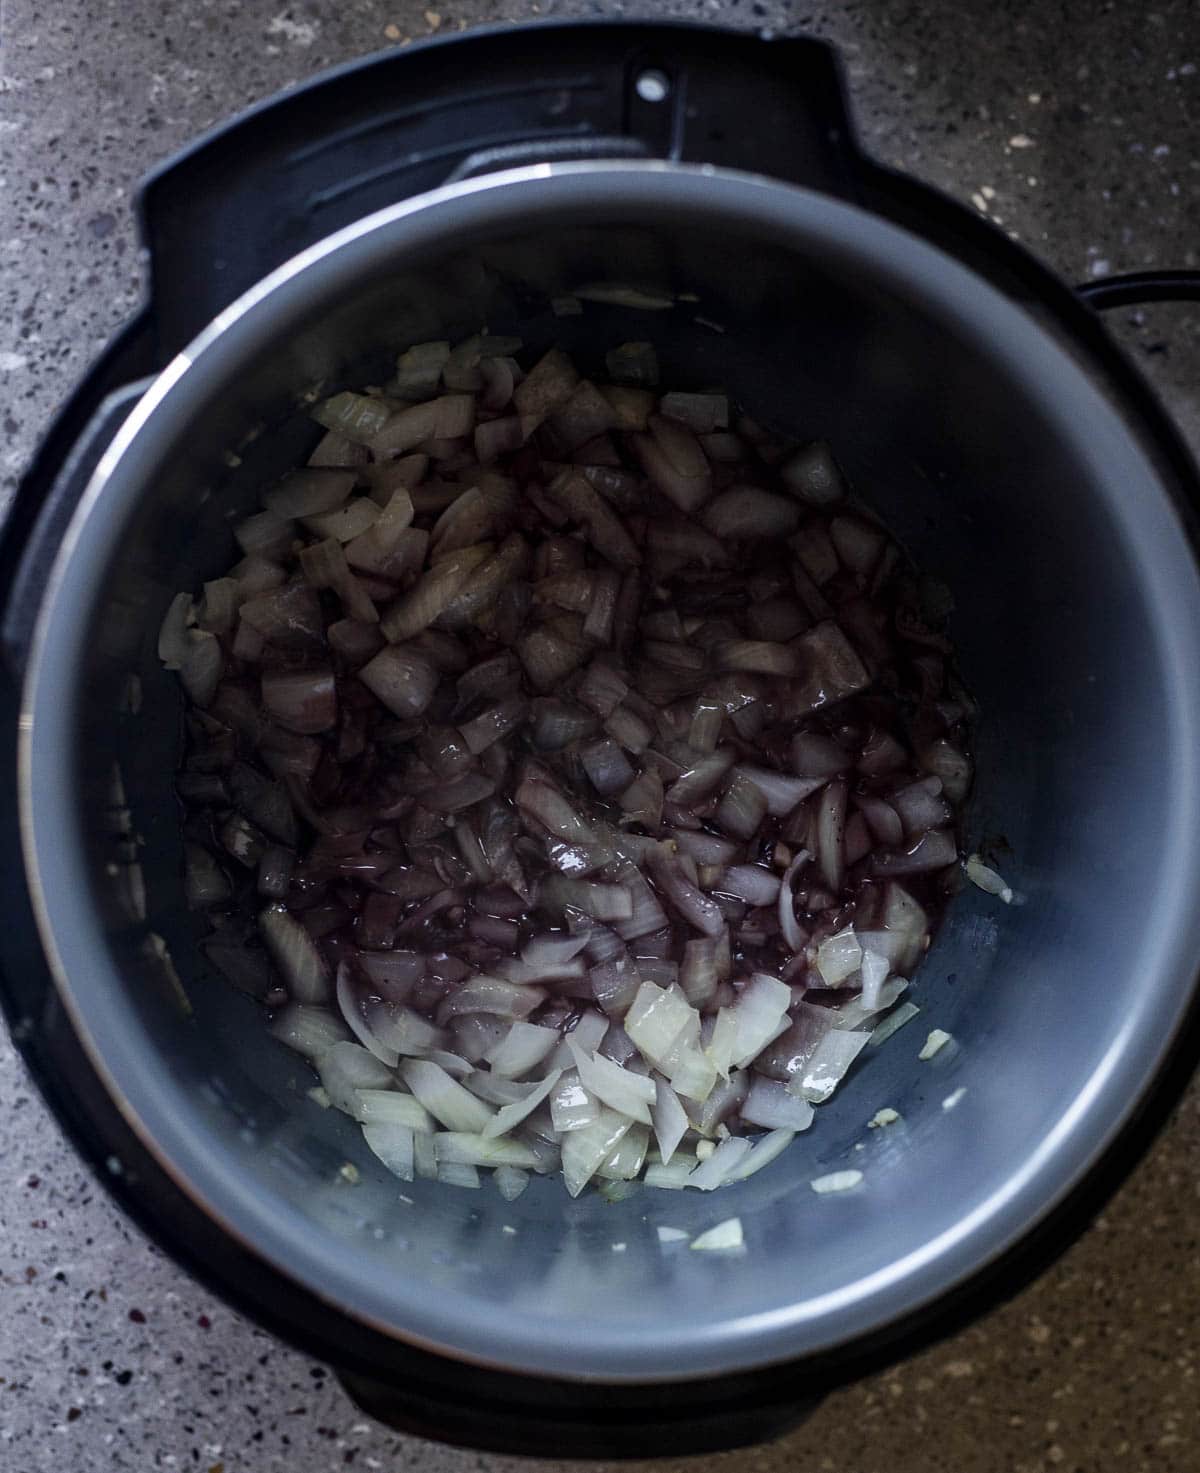 Onions and garlic cooked down with red wine in the Instant Pot.